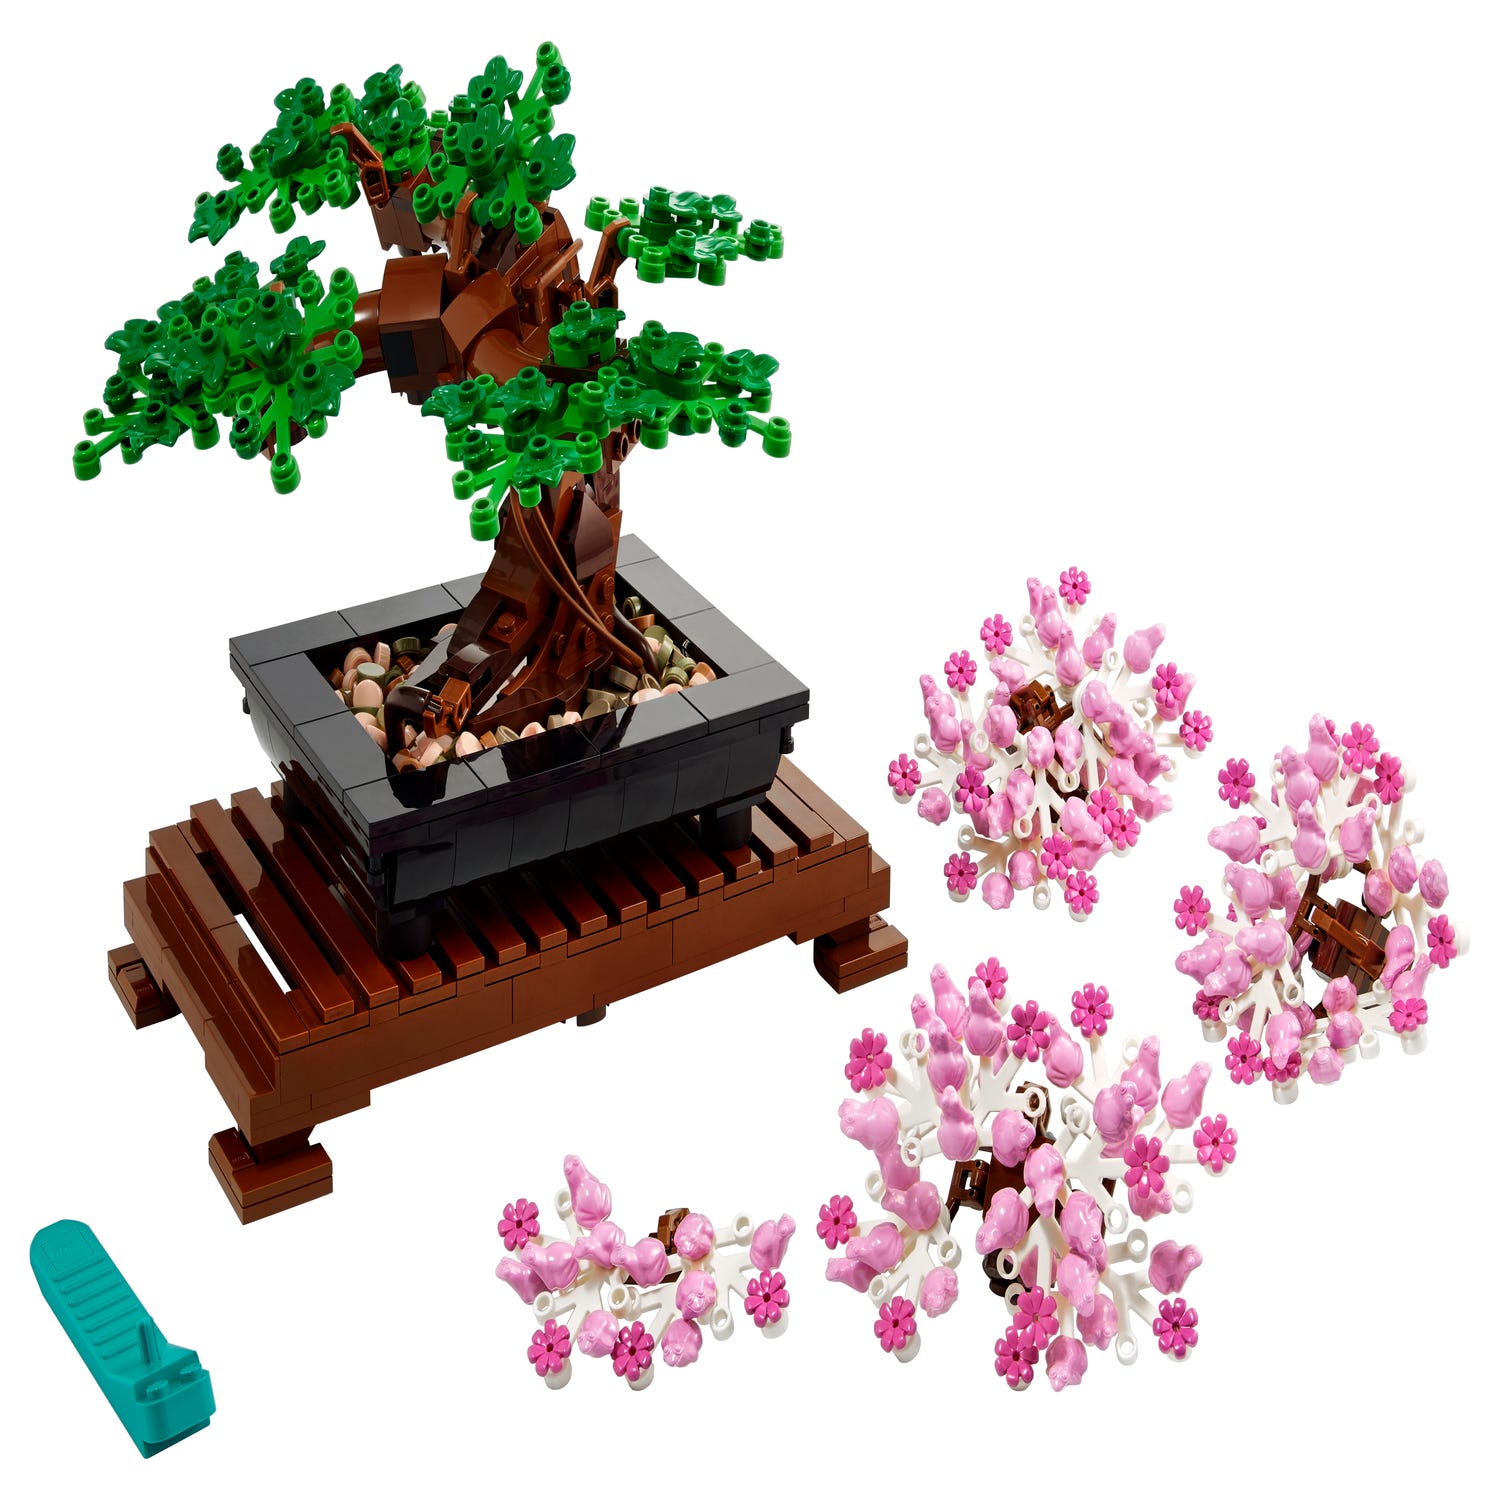 Great Bonsai Tree Lego Set in the world Learn more here 